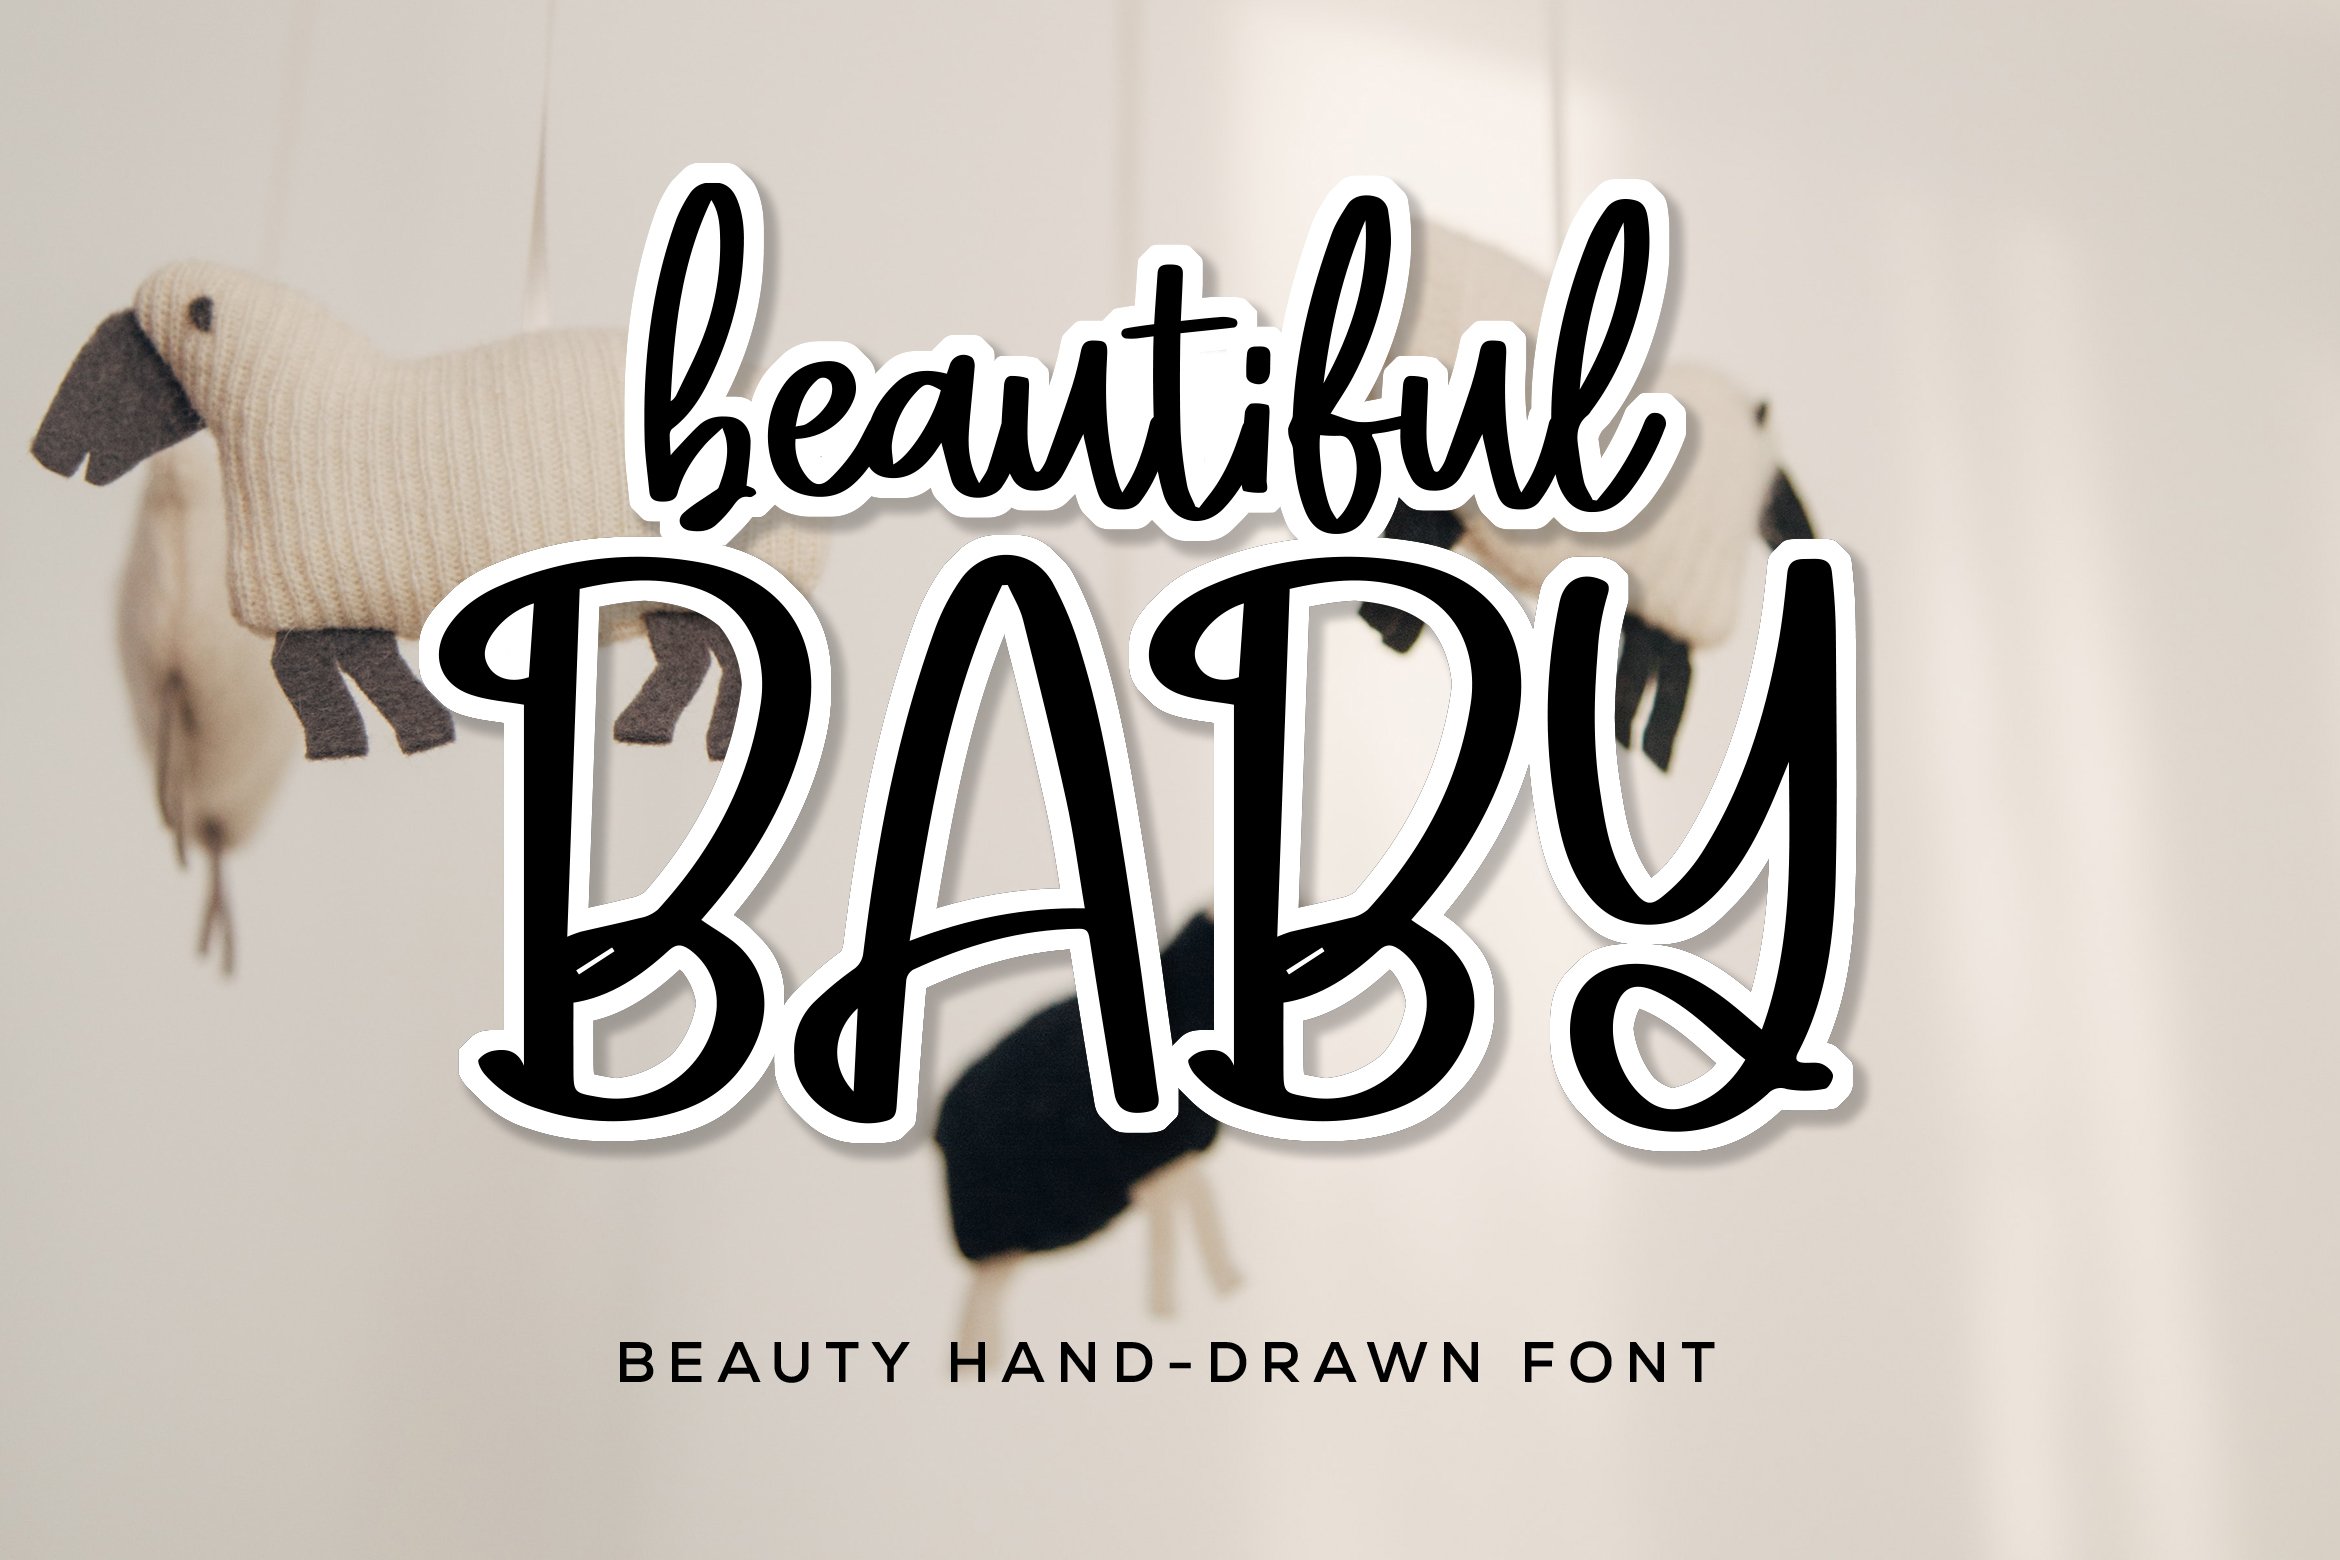 Beautiful Baby-Beauty Handdrawn Font cover image.